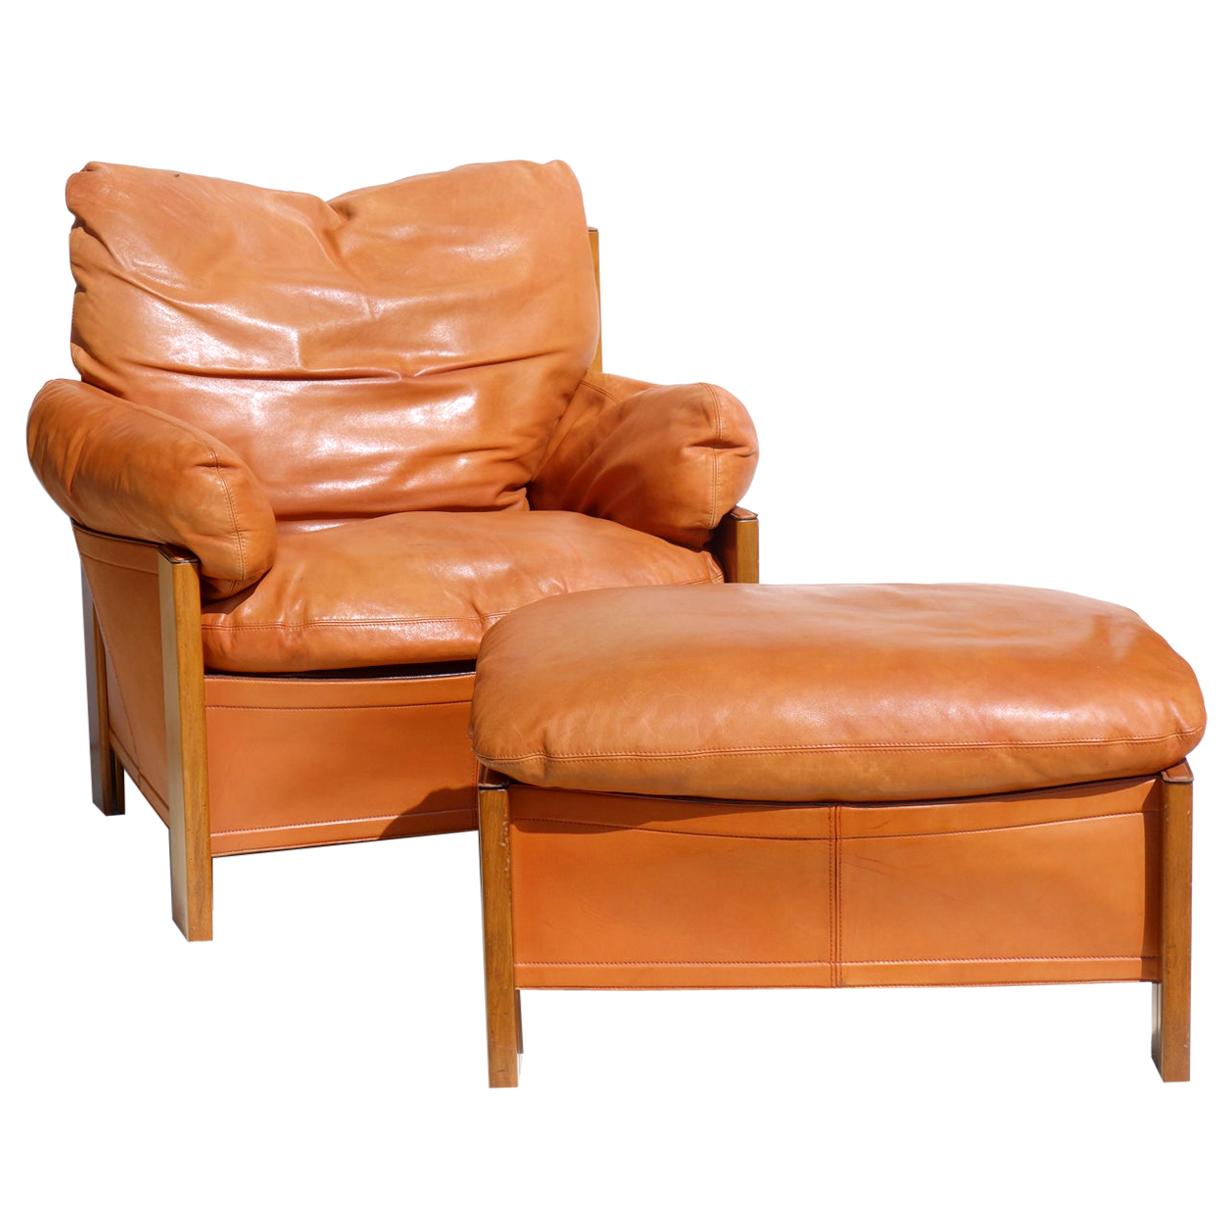 1970 "Bergere" Brown Leather Armchair & Ottoman Afra Tobia Scarpa for Max Alto